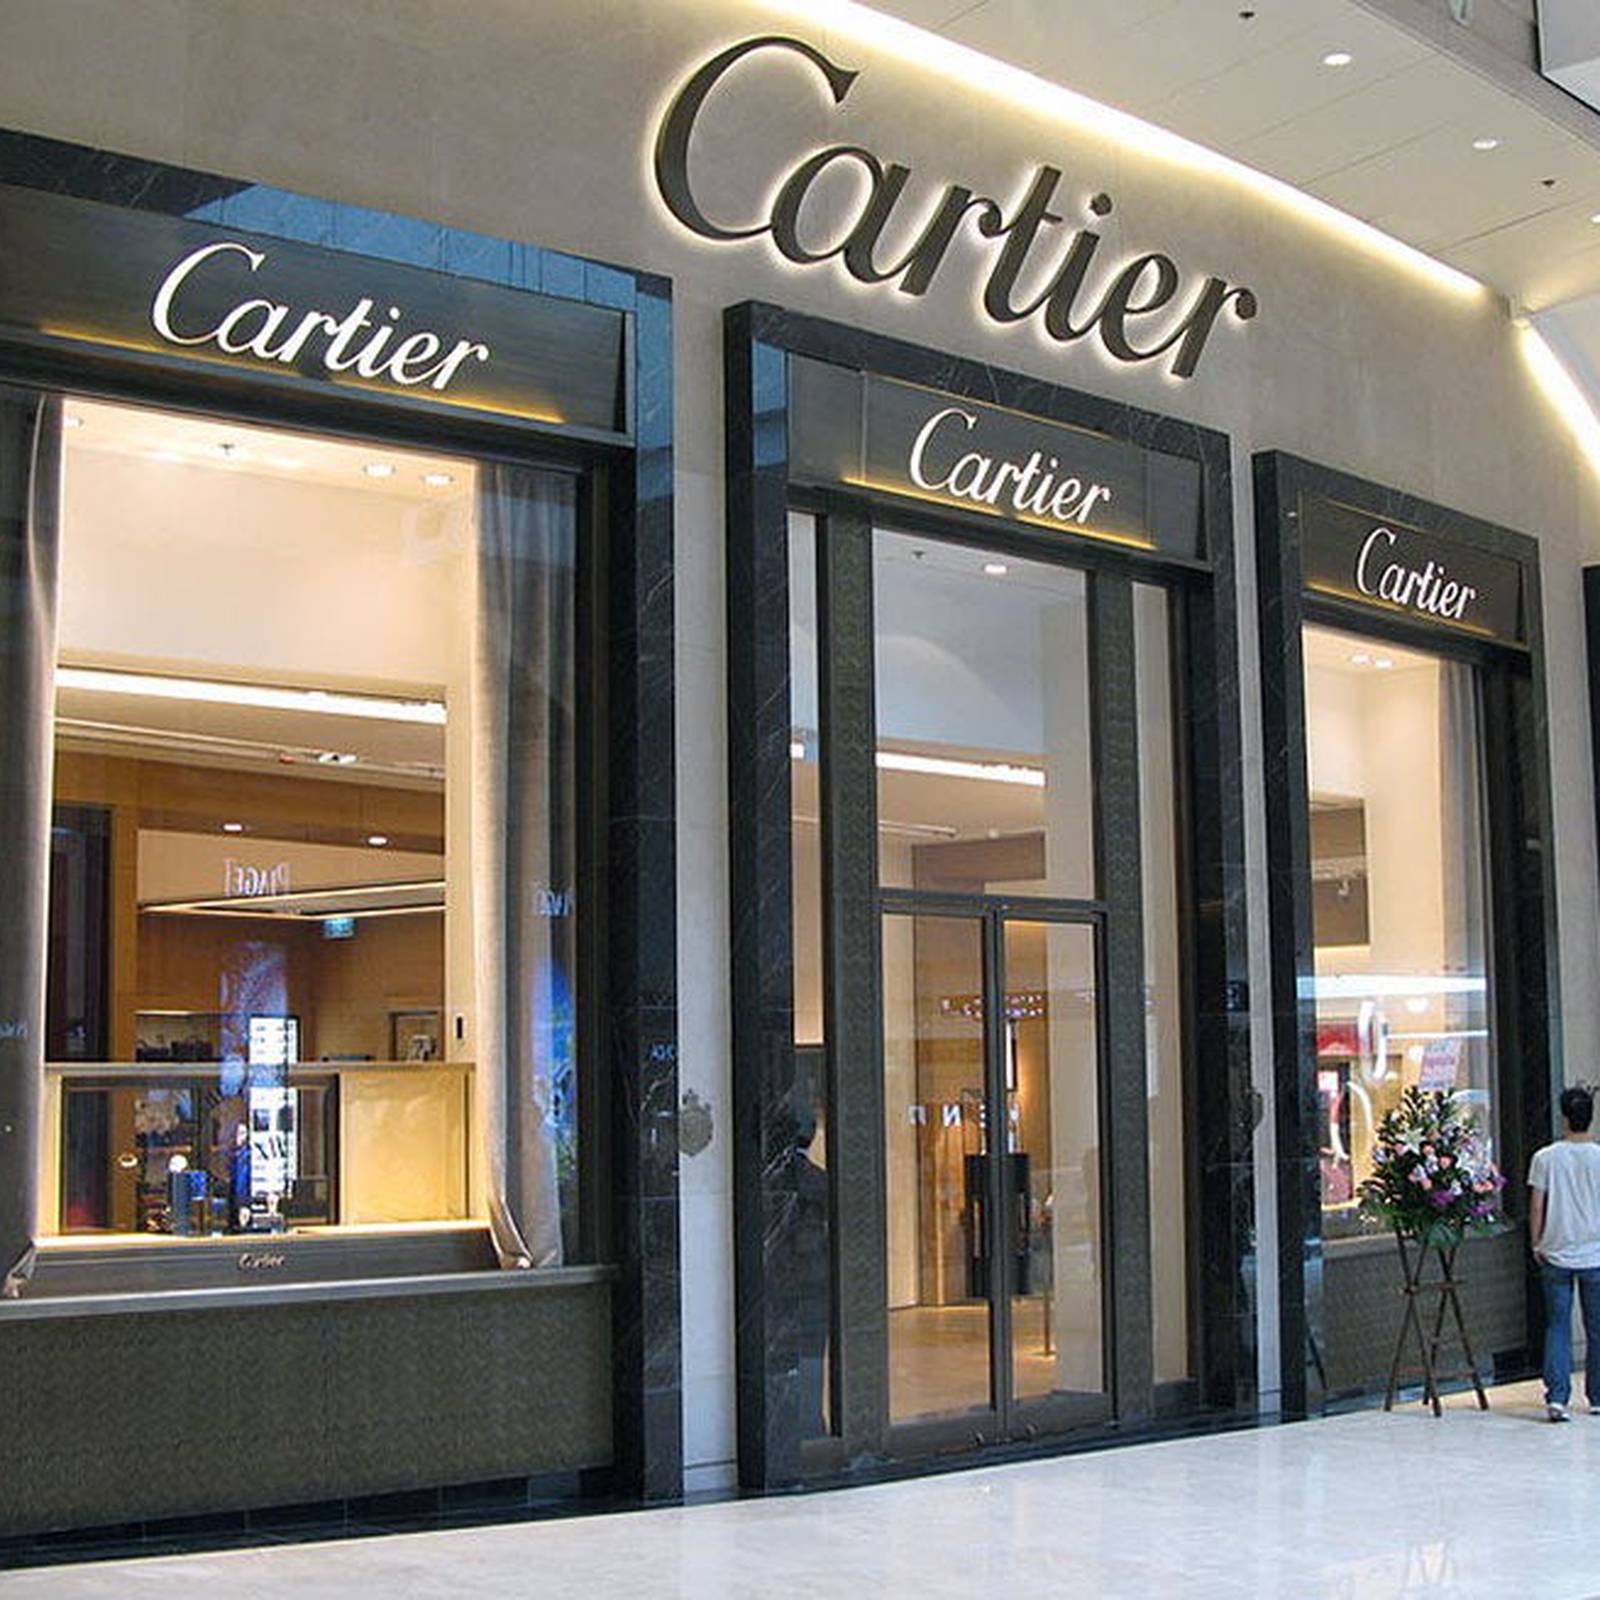 Brexit Gives Europeans $15,000 Discount on Cartier Watch